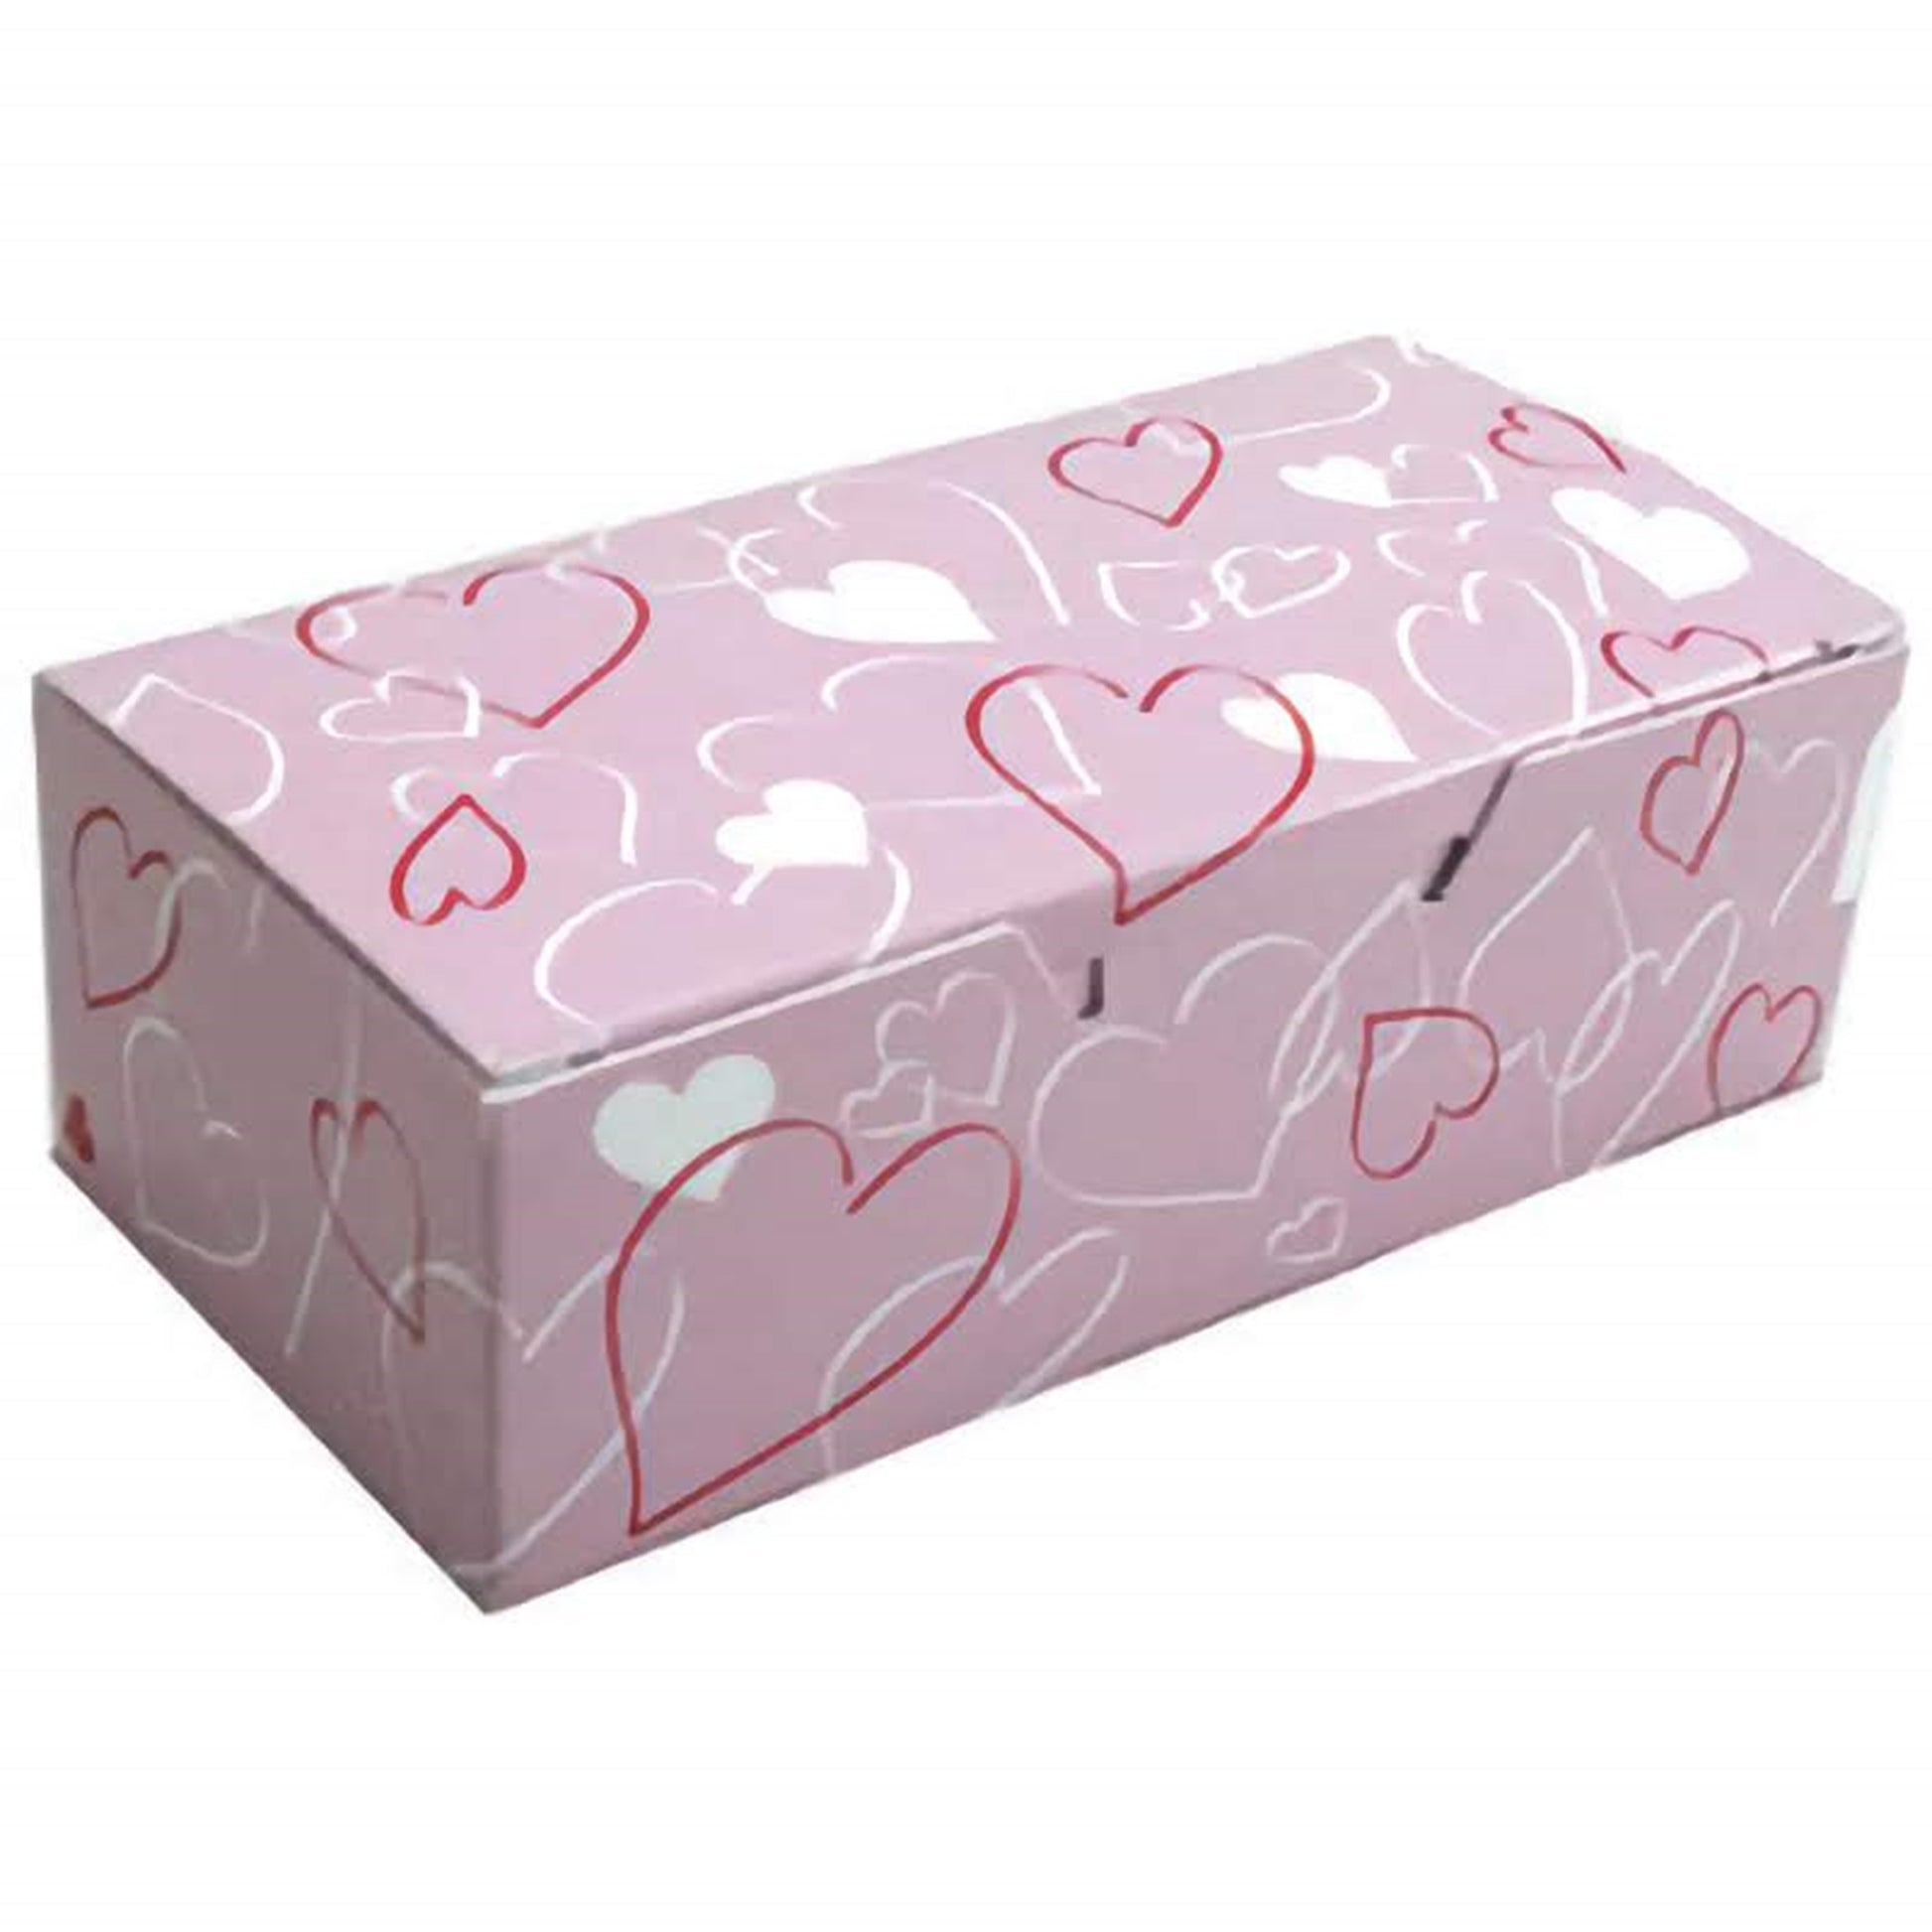 A rectangular candy box adorned with various heart outlines in shades of pink and white, creating a pattern of intertwined hearts for a romantic and charming presentation.